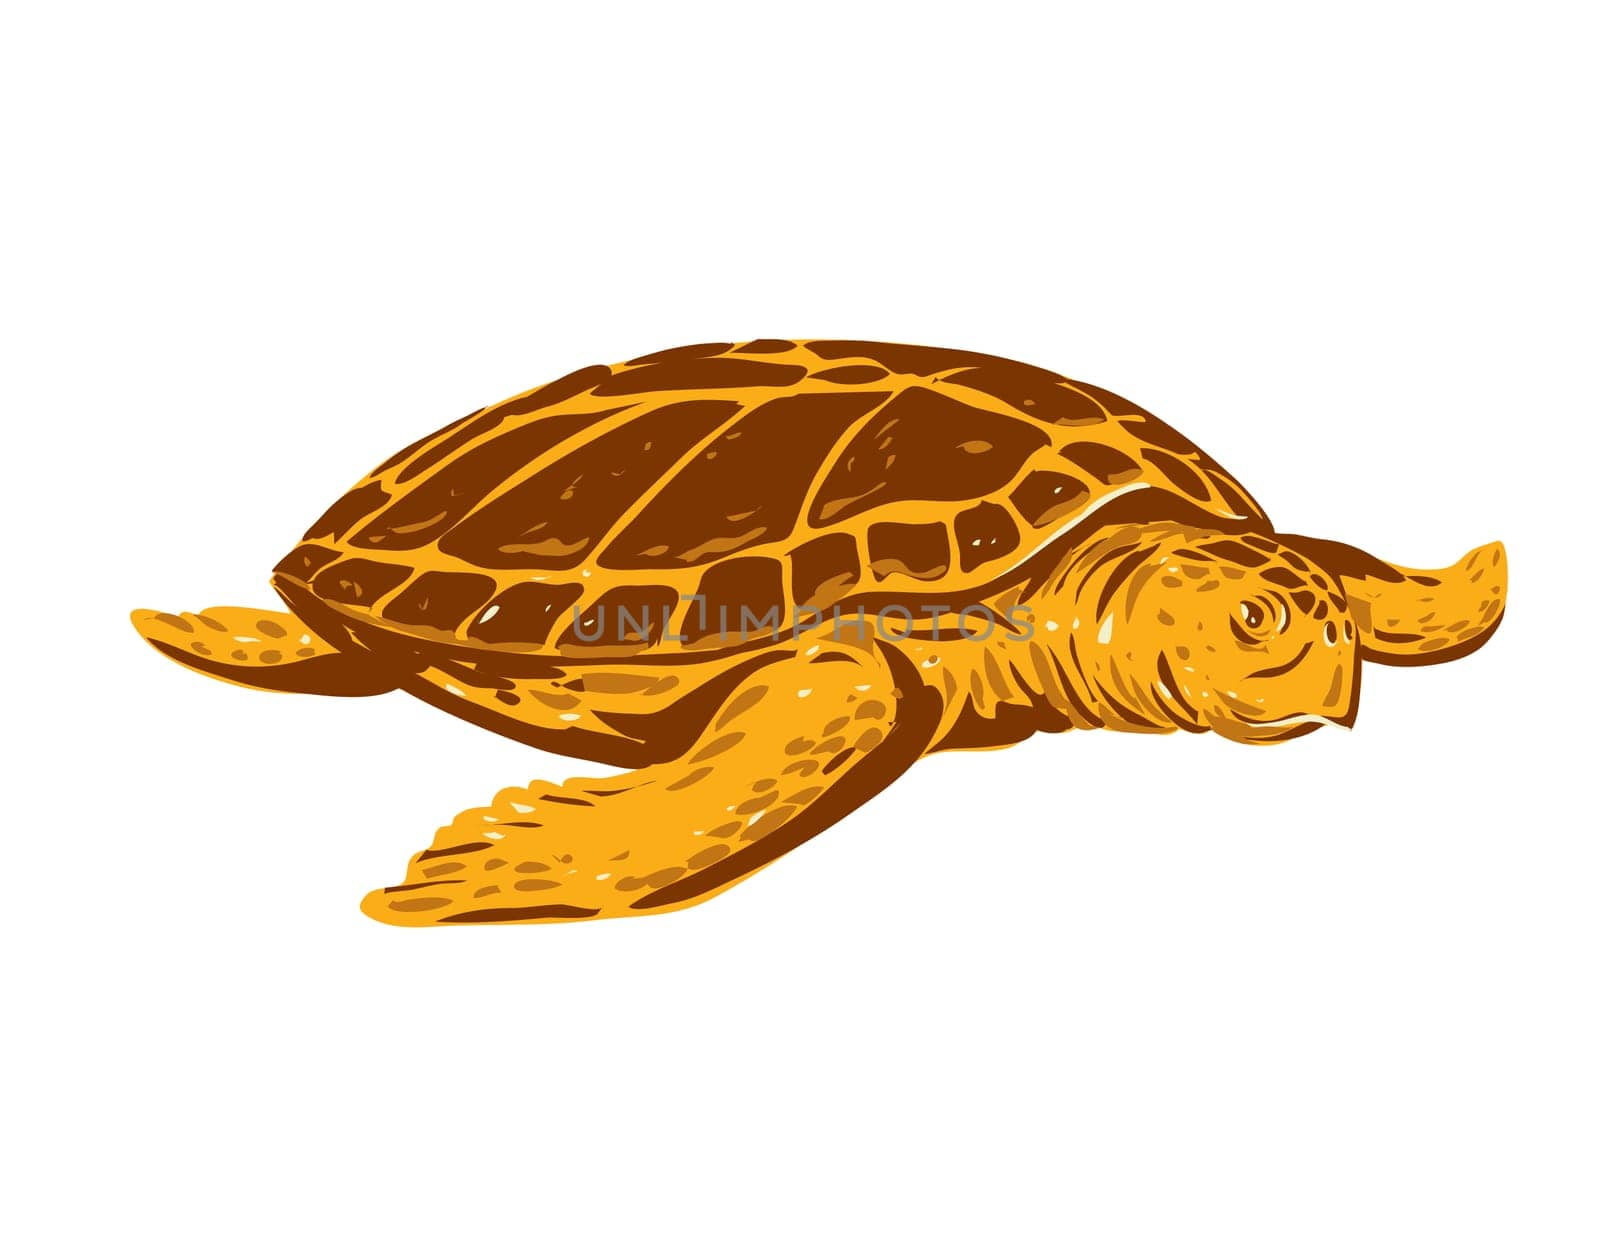 WPA poster art of a loggerhead sea turtle or Caretta caretta, a species of oceanic turtle viewed from front done in works project administration or federal art project style.
